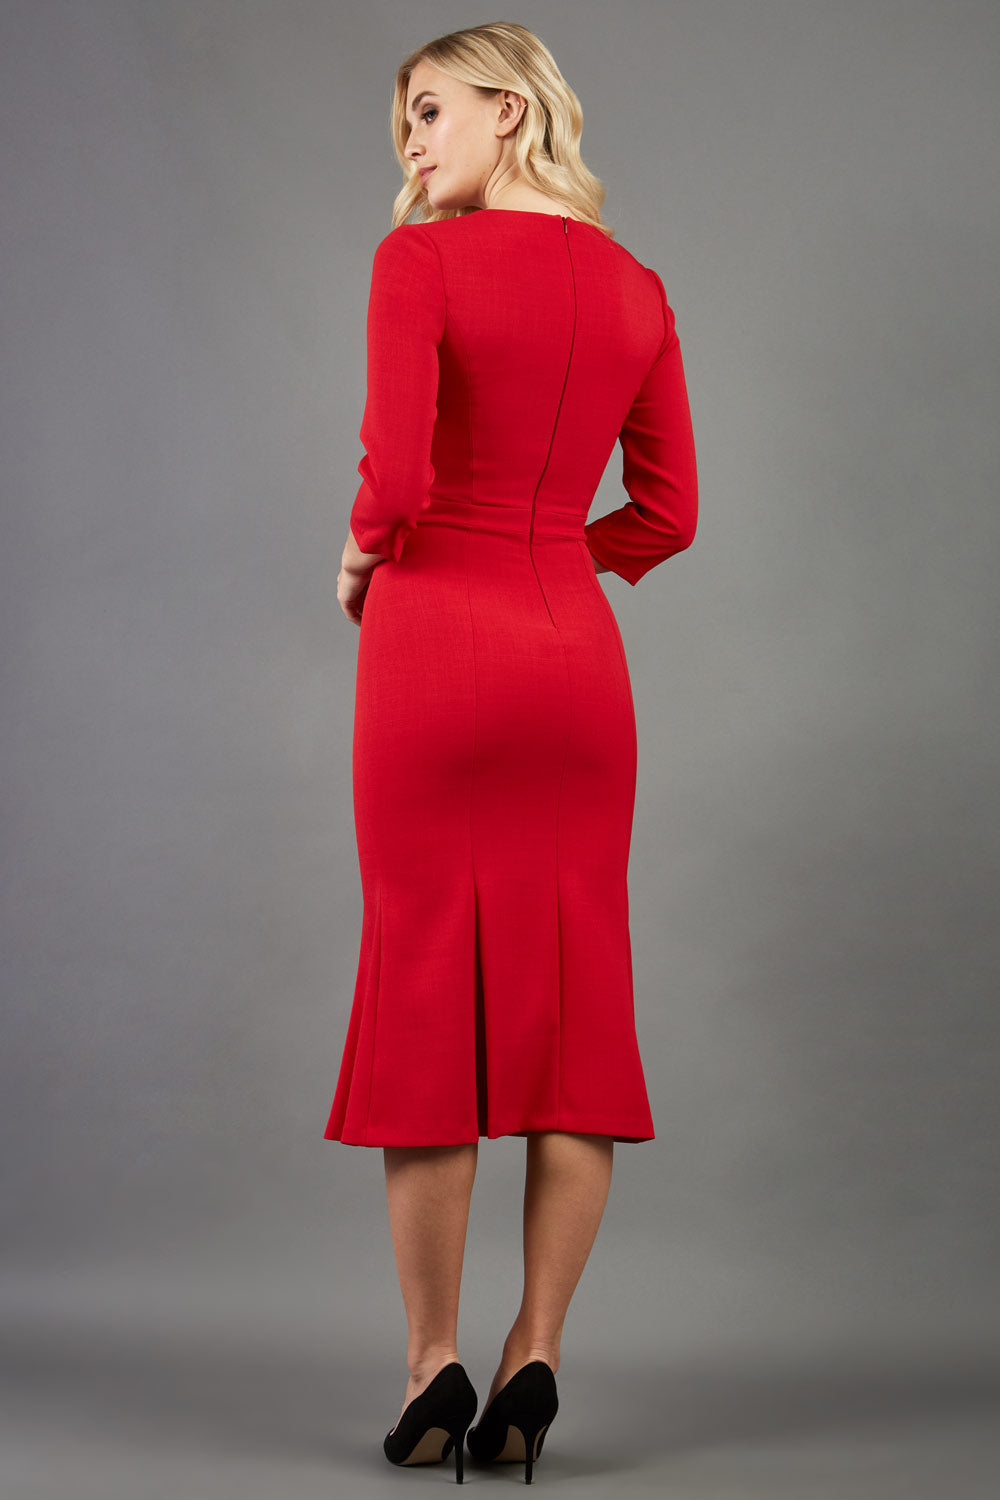 blonde model is wearing diva catwalk senne midaxi sleeved dress with fishtail and rounded neckline with a slit in the middle in red back